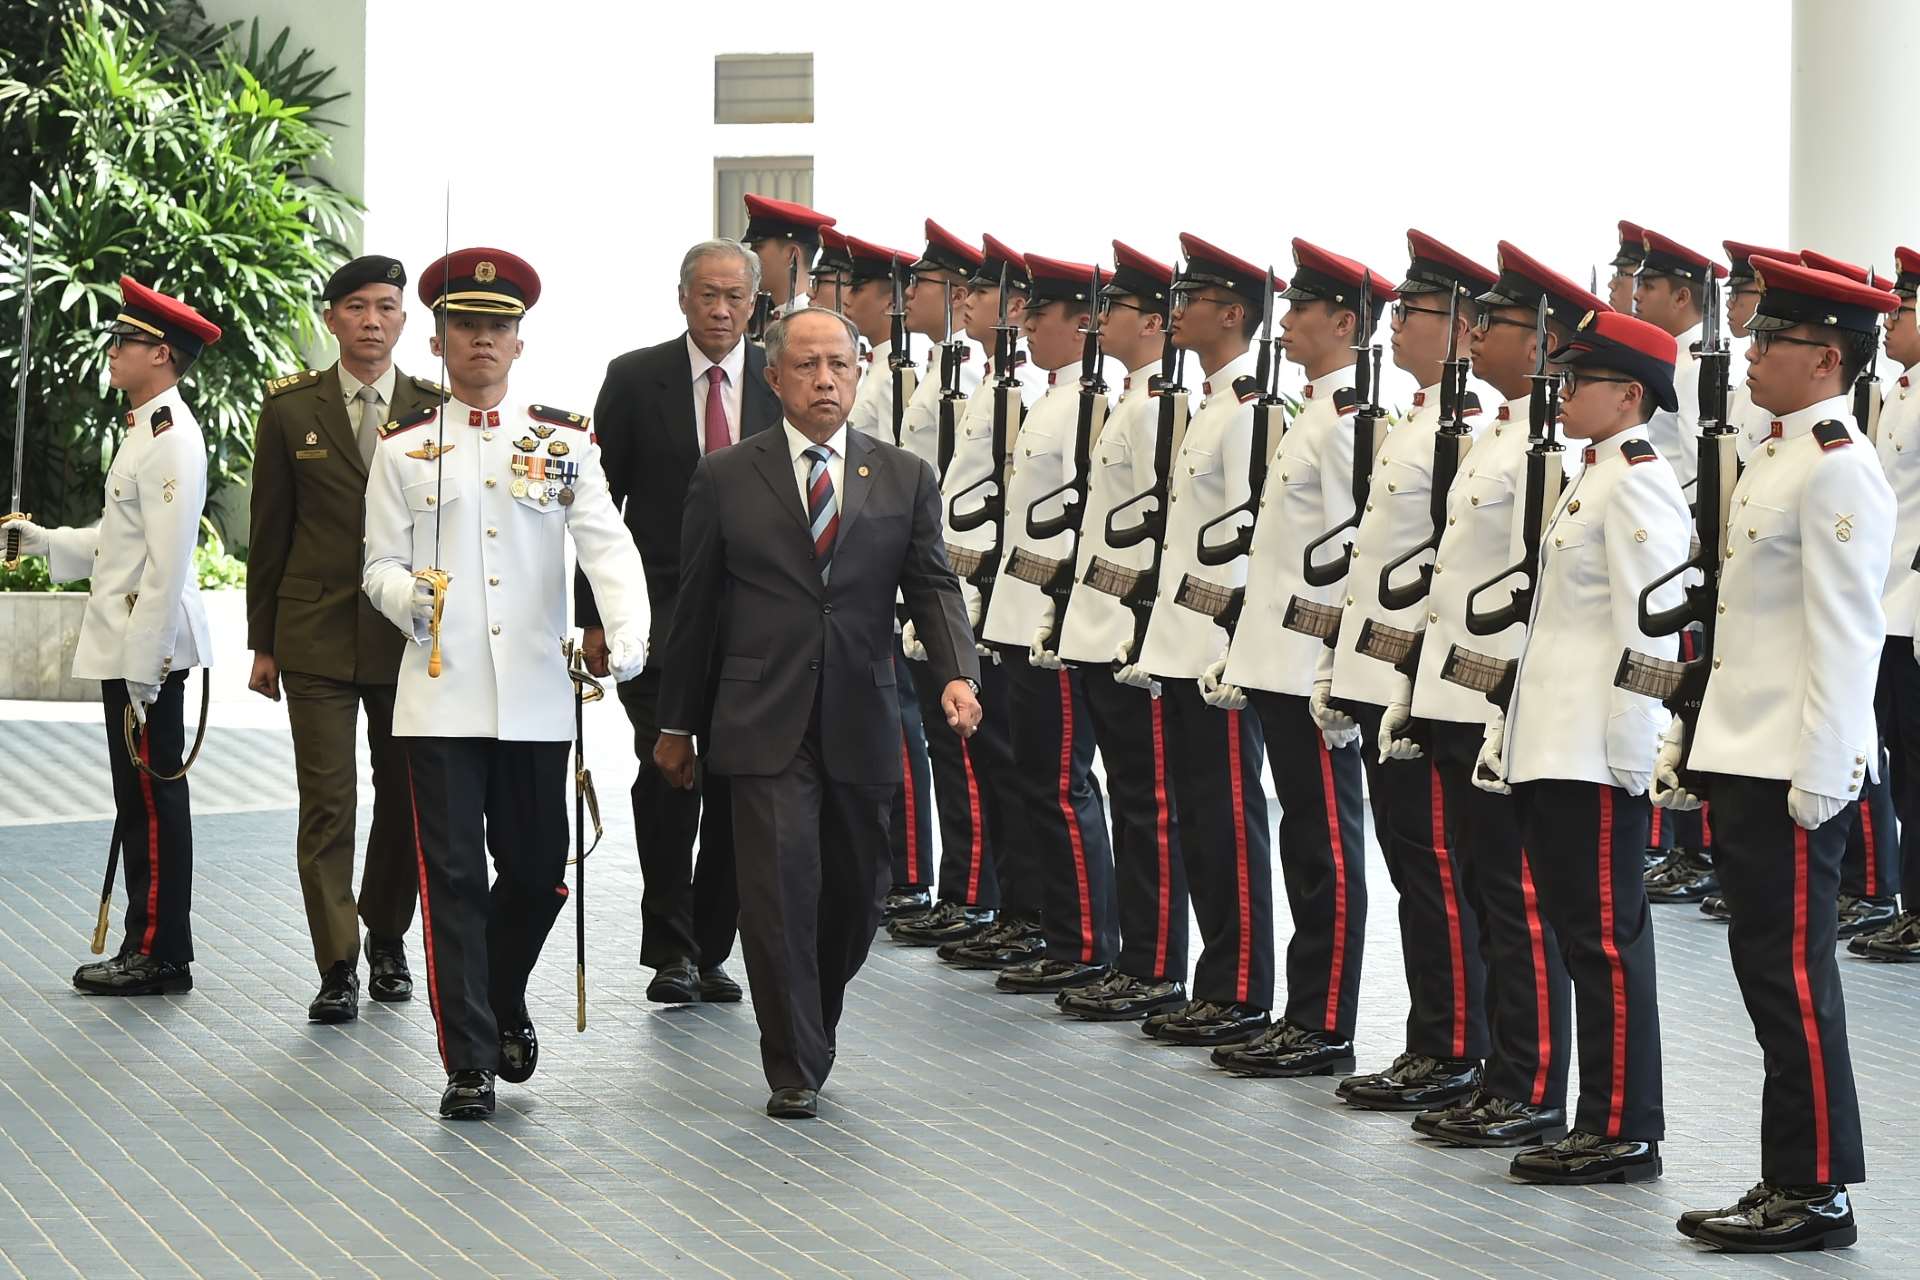 Pehin MG(Rtd) Halbi (fifth from left), accompanied by Dr Ng (fourth from left), reviewing the Guard of Honour at MINDEF.